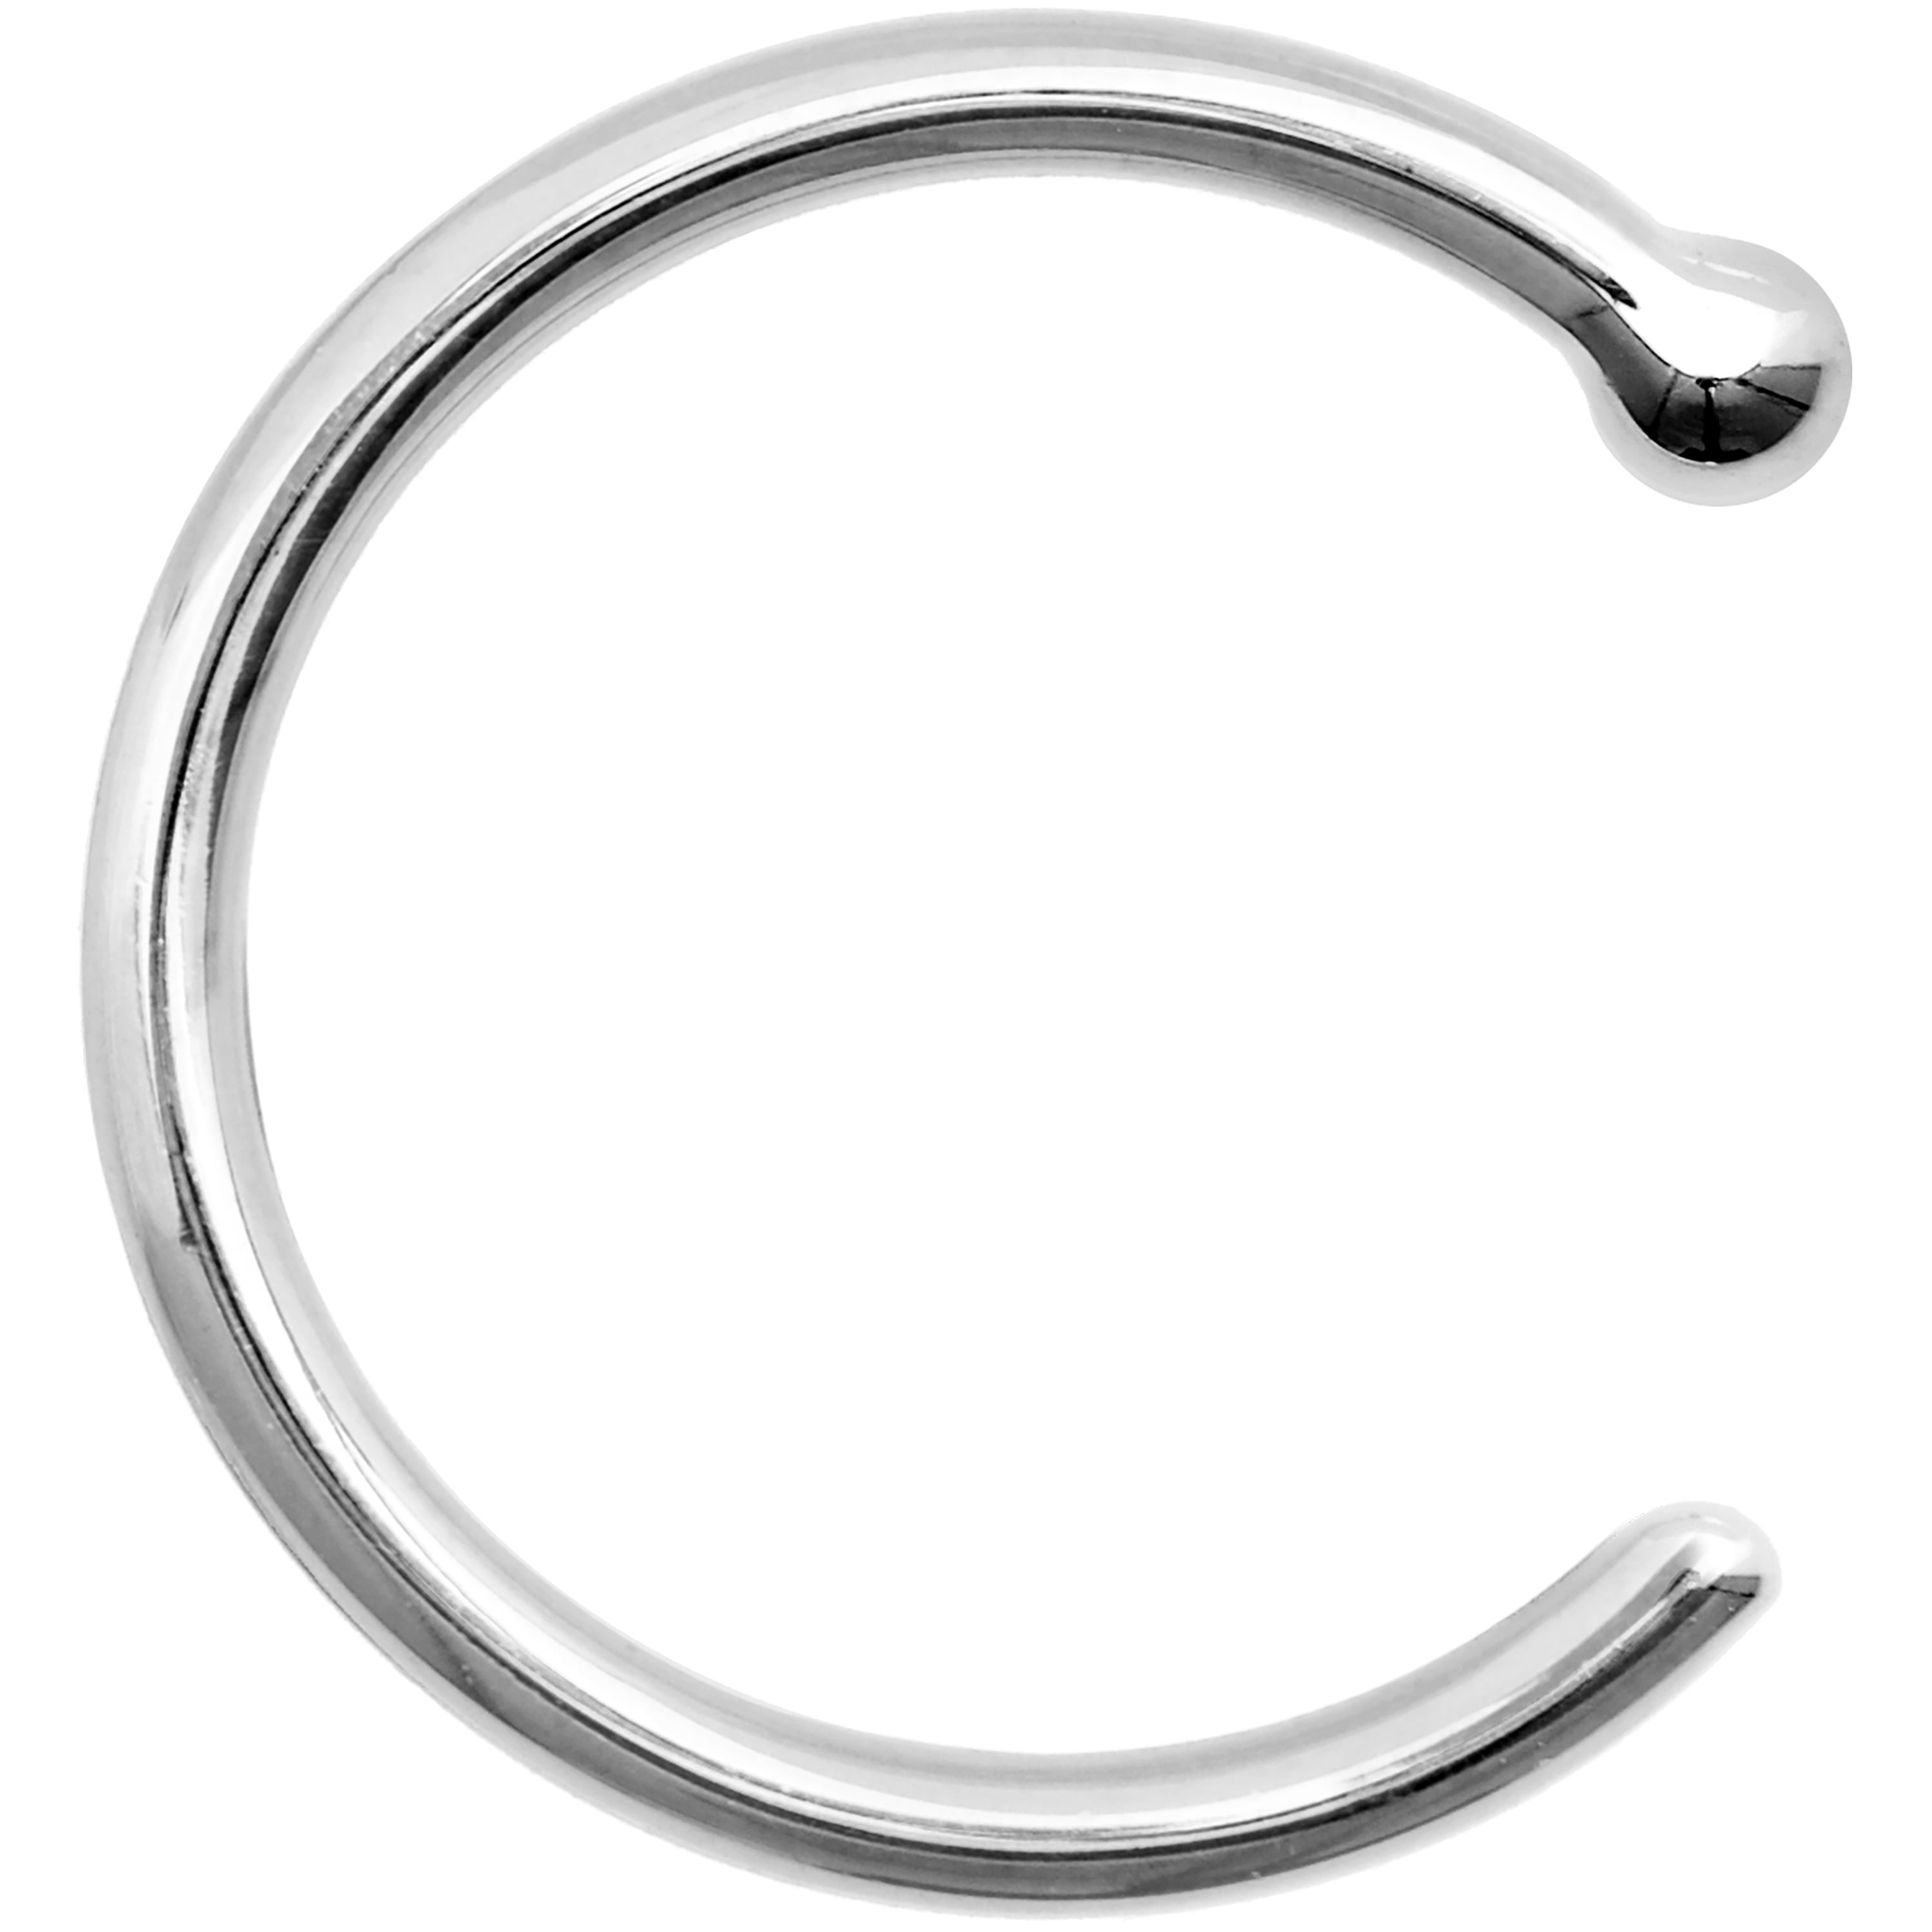 Body Candy Handmade Usa Nose Ring 925 Sterling Silver Nose Hoop 5 16 18 Gauge Unisex